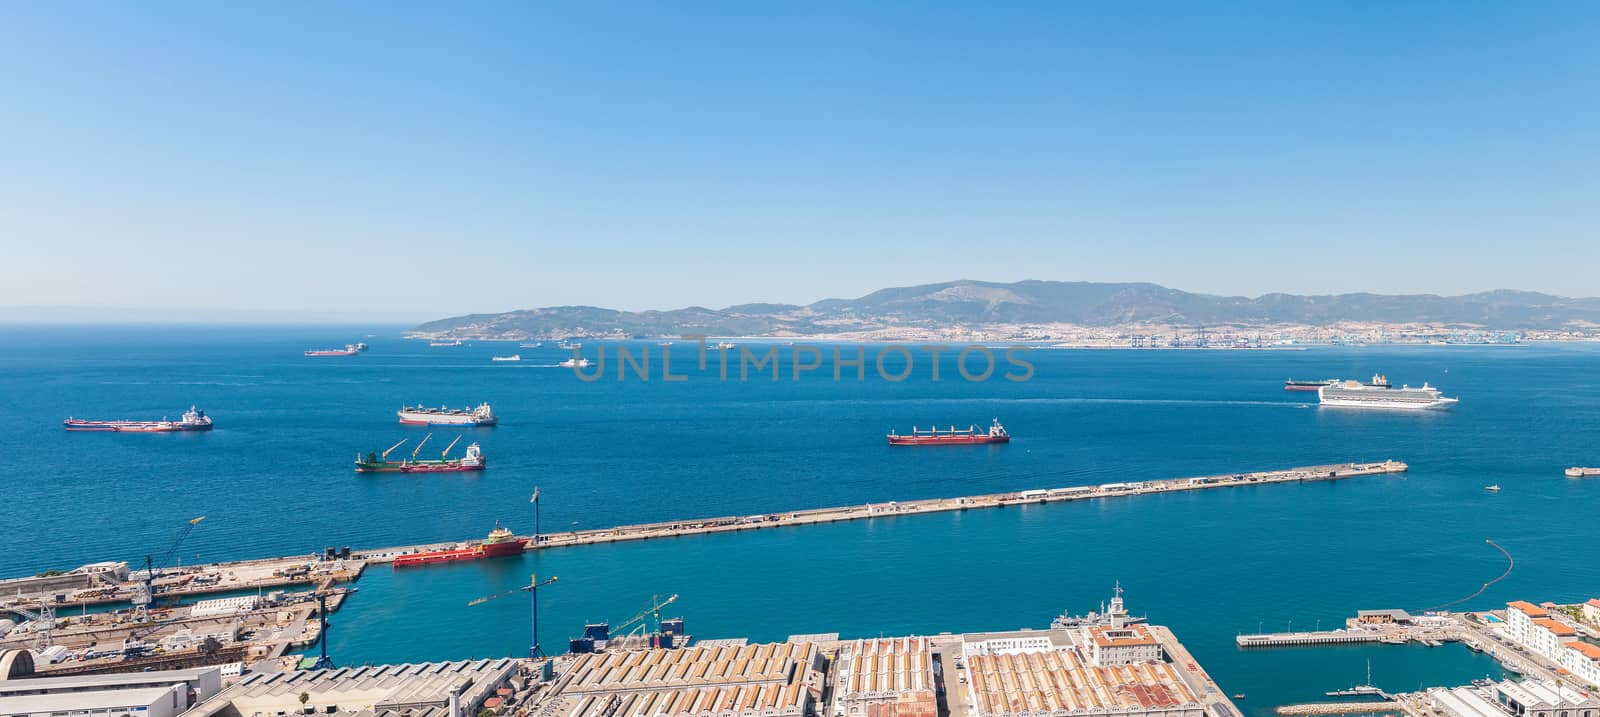 Panoramic view over the Strait of Gibraltar by mkos83